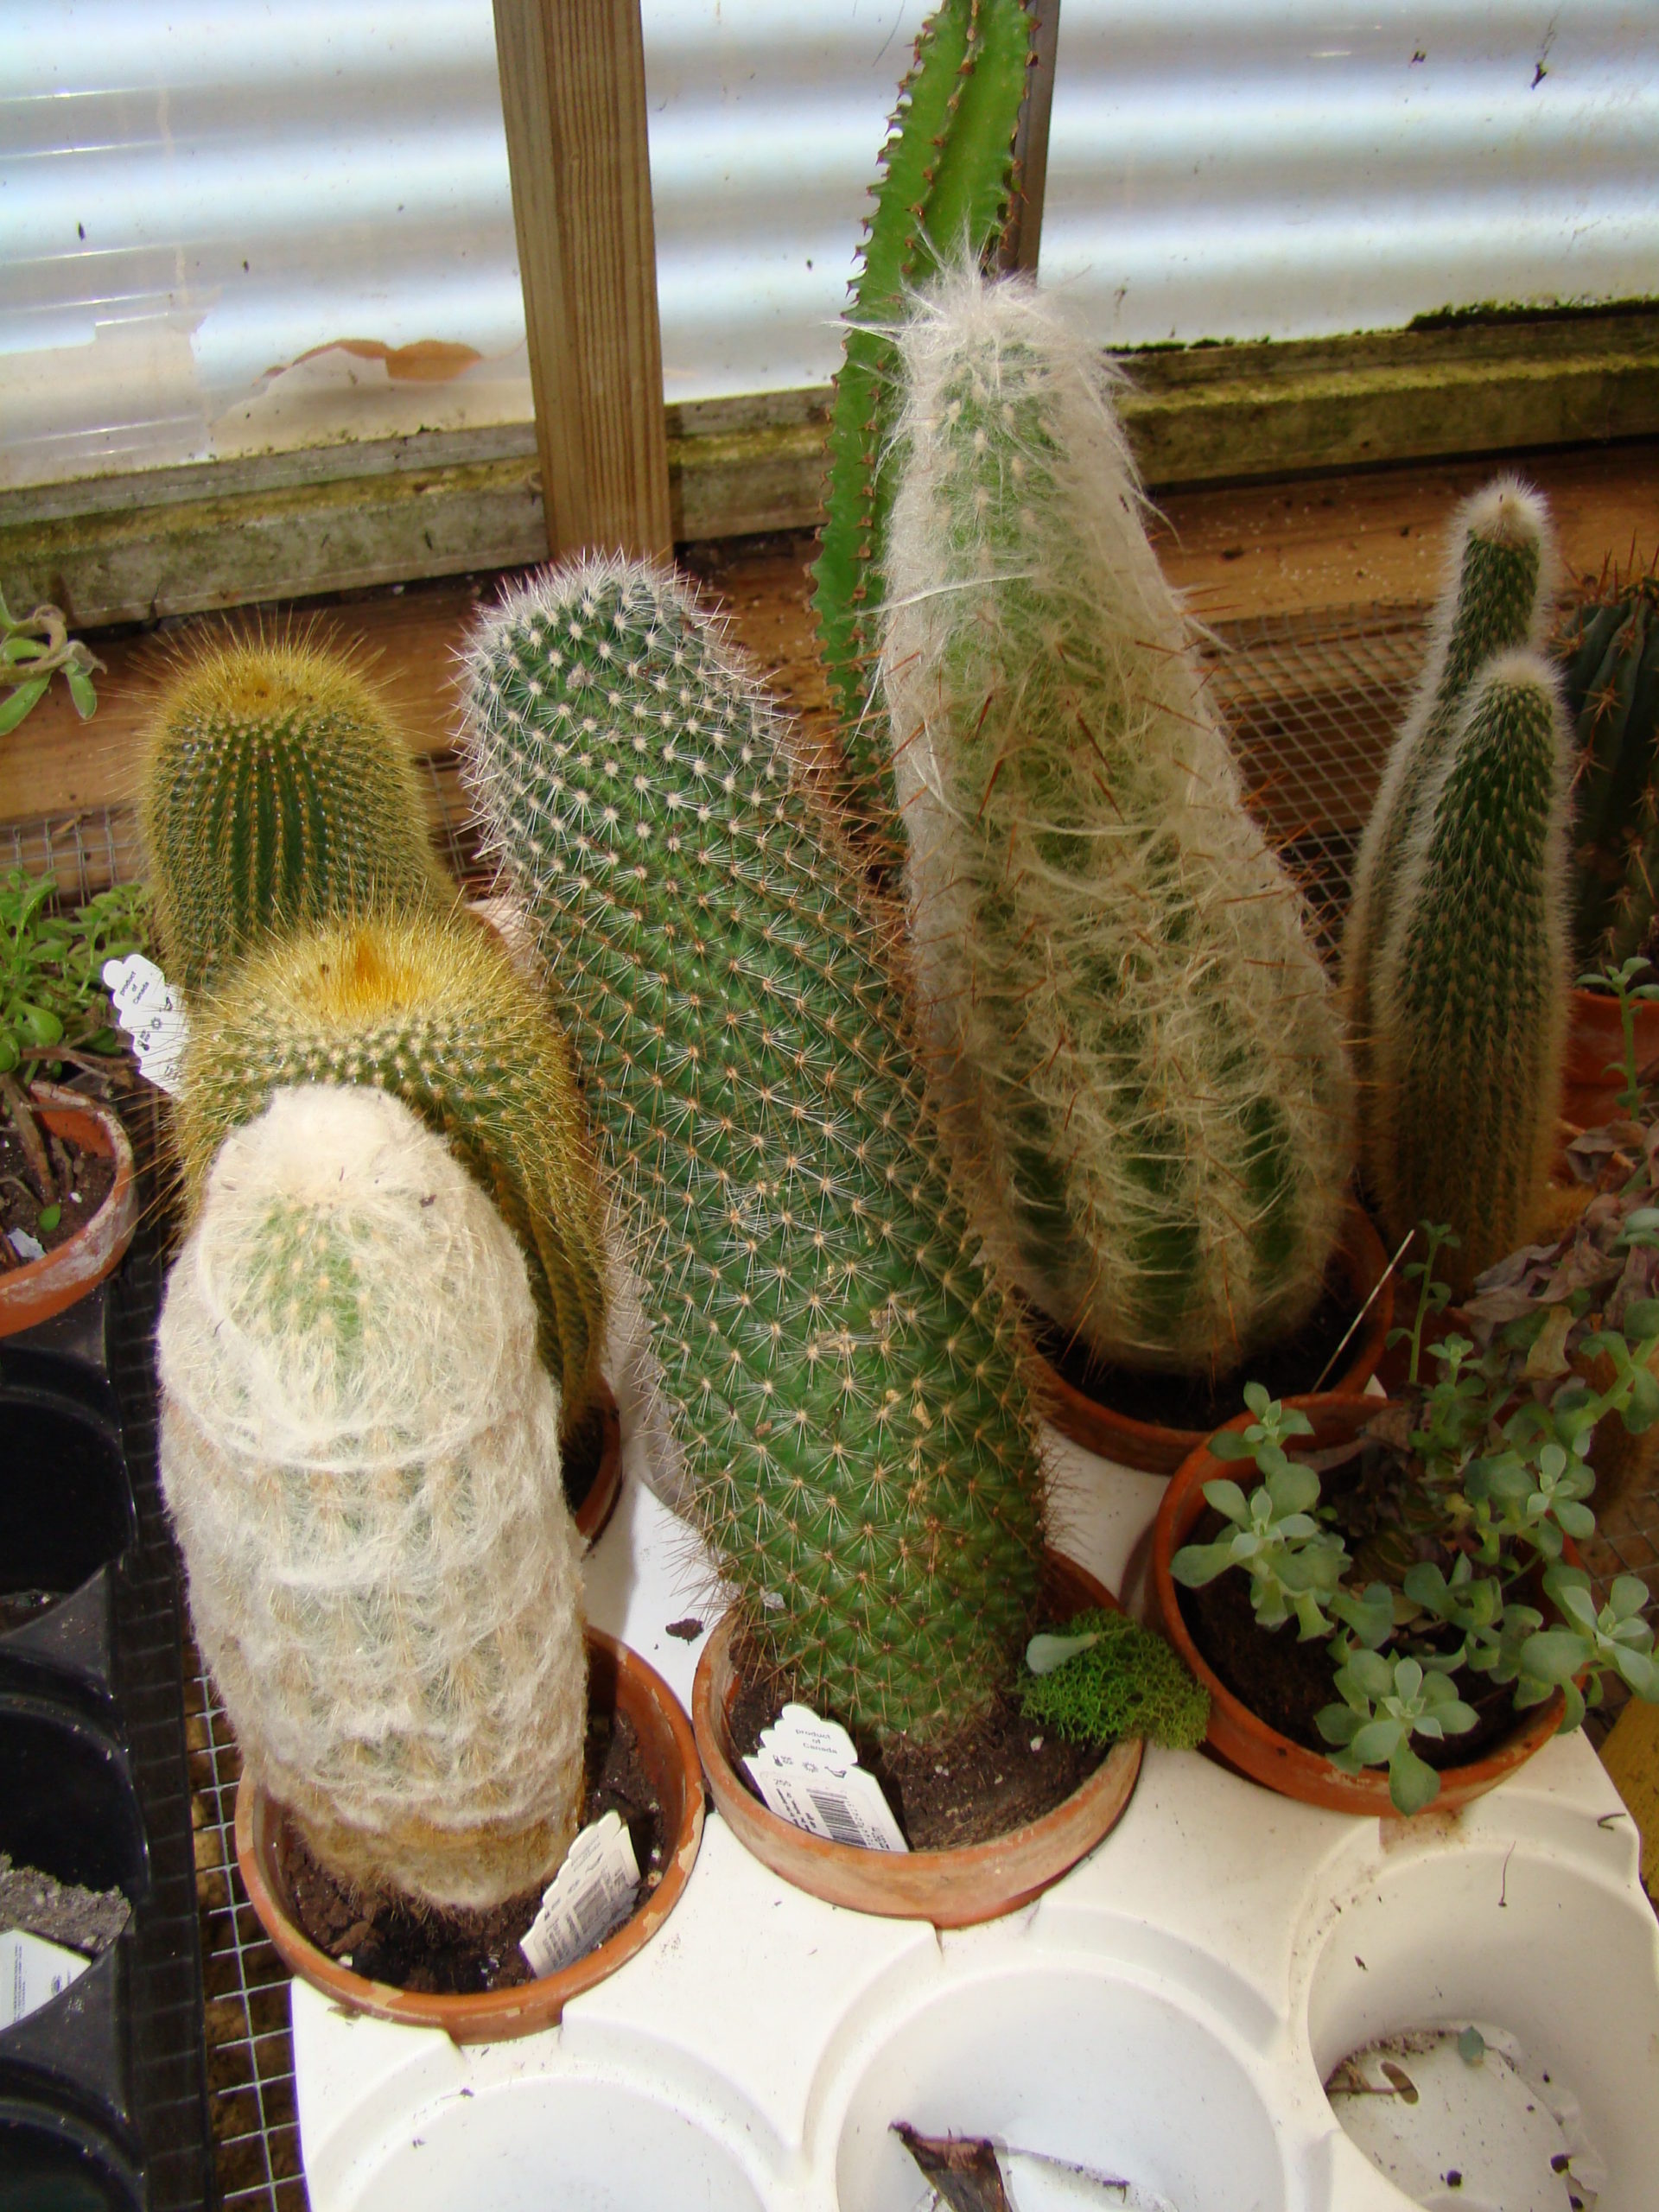 Local garden centers have several varieties of cacti to choose from. There are seven varieties here. The lower right is a succulent, but not a cacti. These are all in small clay pots and would make great holiday gifts (careful wrapping) or collection additions.